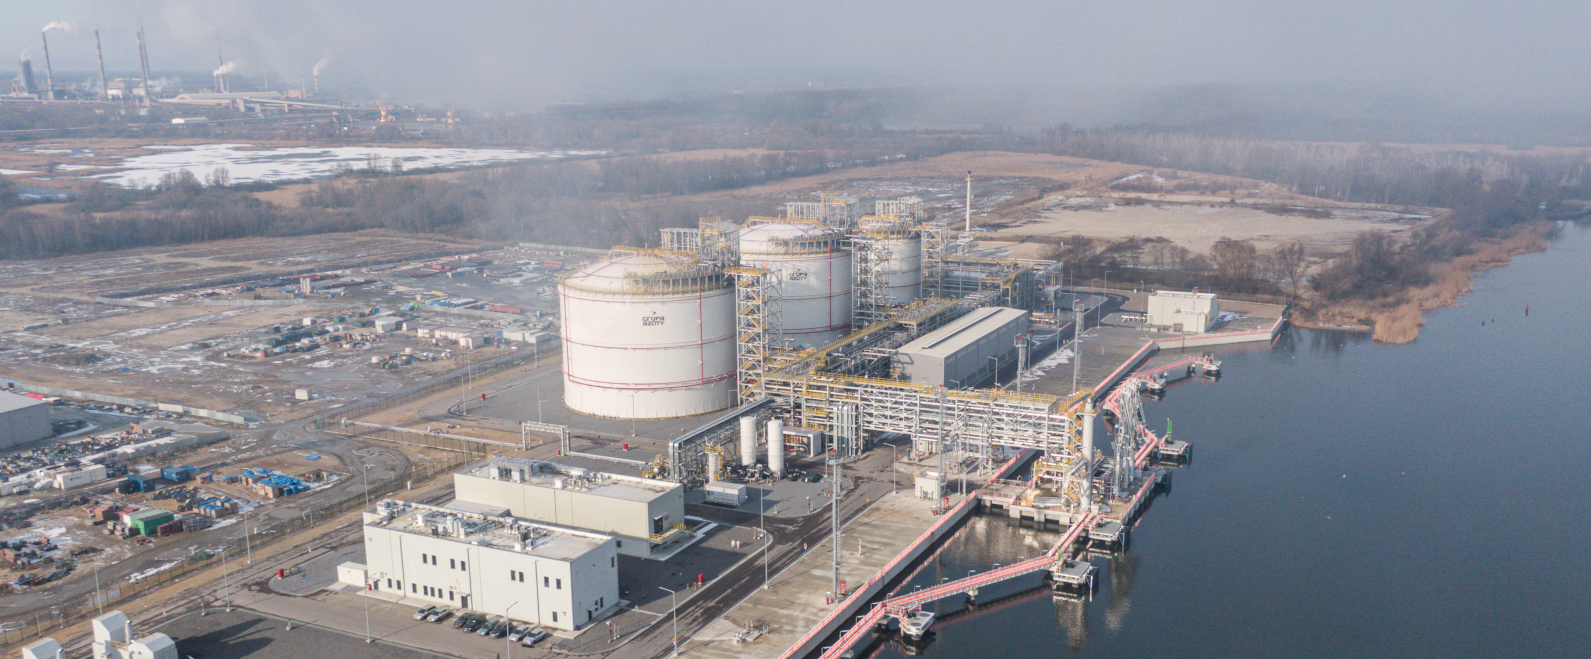 Construction of Grupa Azoty’s new plant approaching finish line. Polimery Police, one of the largest chemical projects in Europe, exceeds 99% completion.